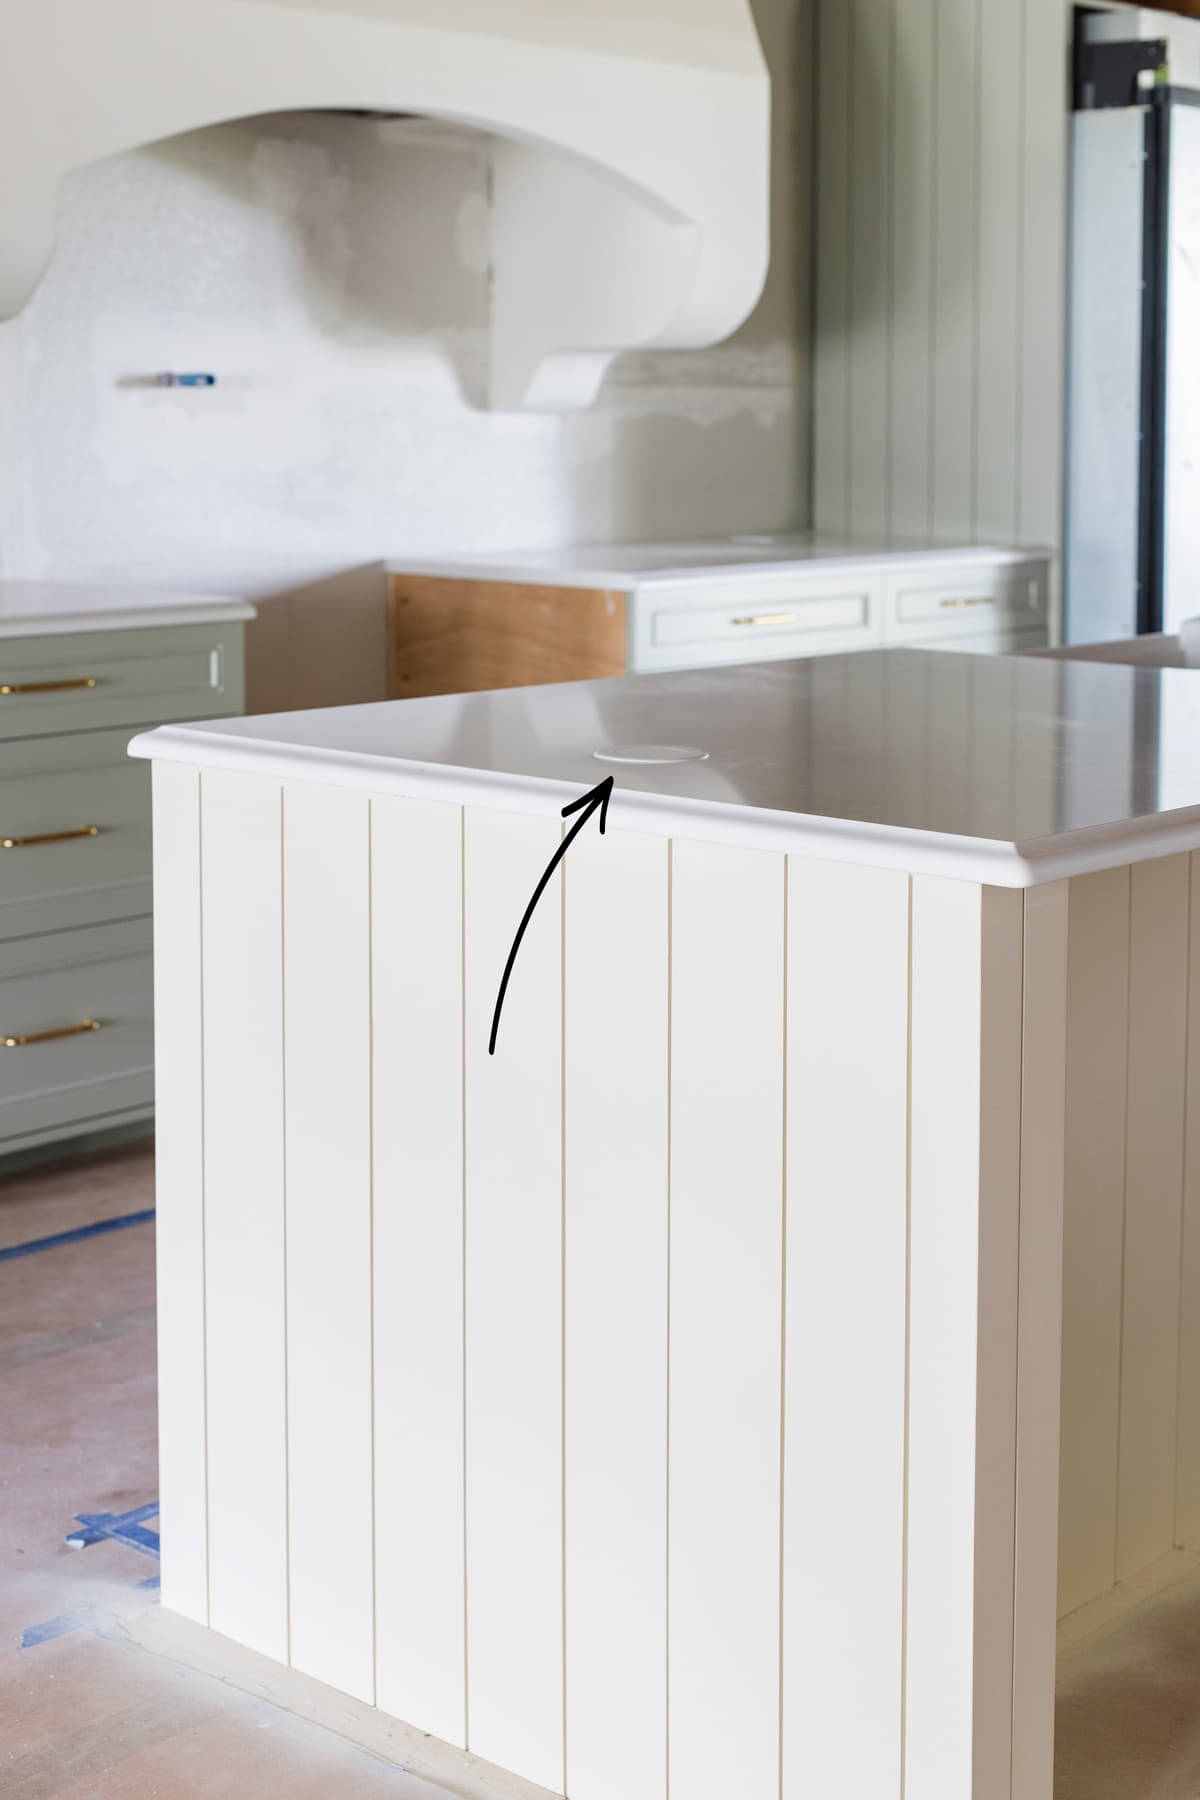 arrow pointing to a white countertop popup outlet in a kitchen island